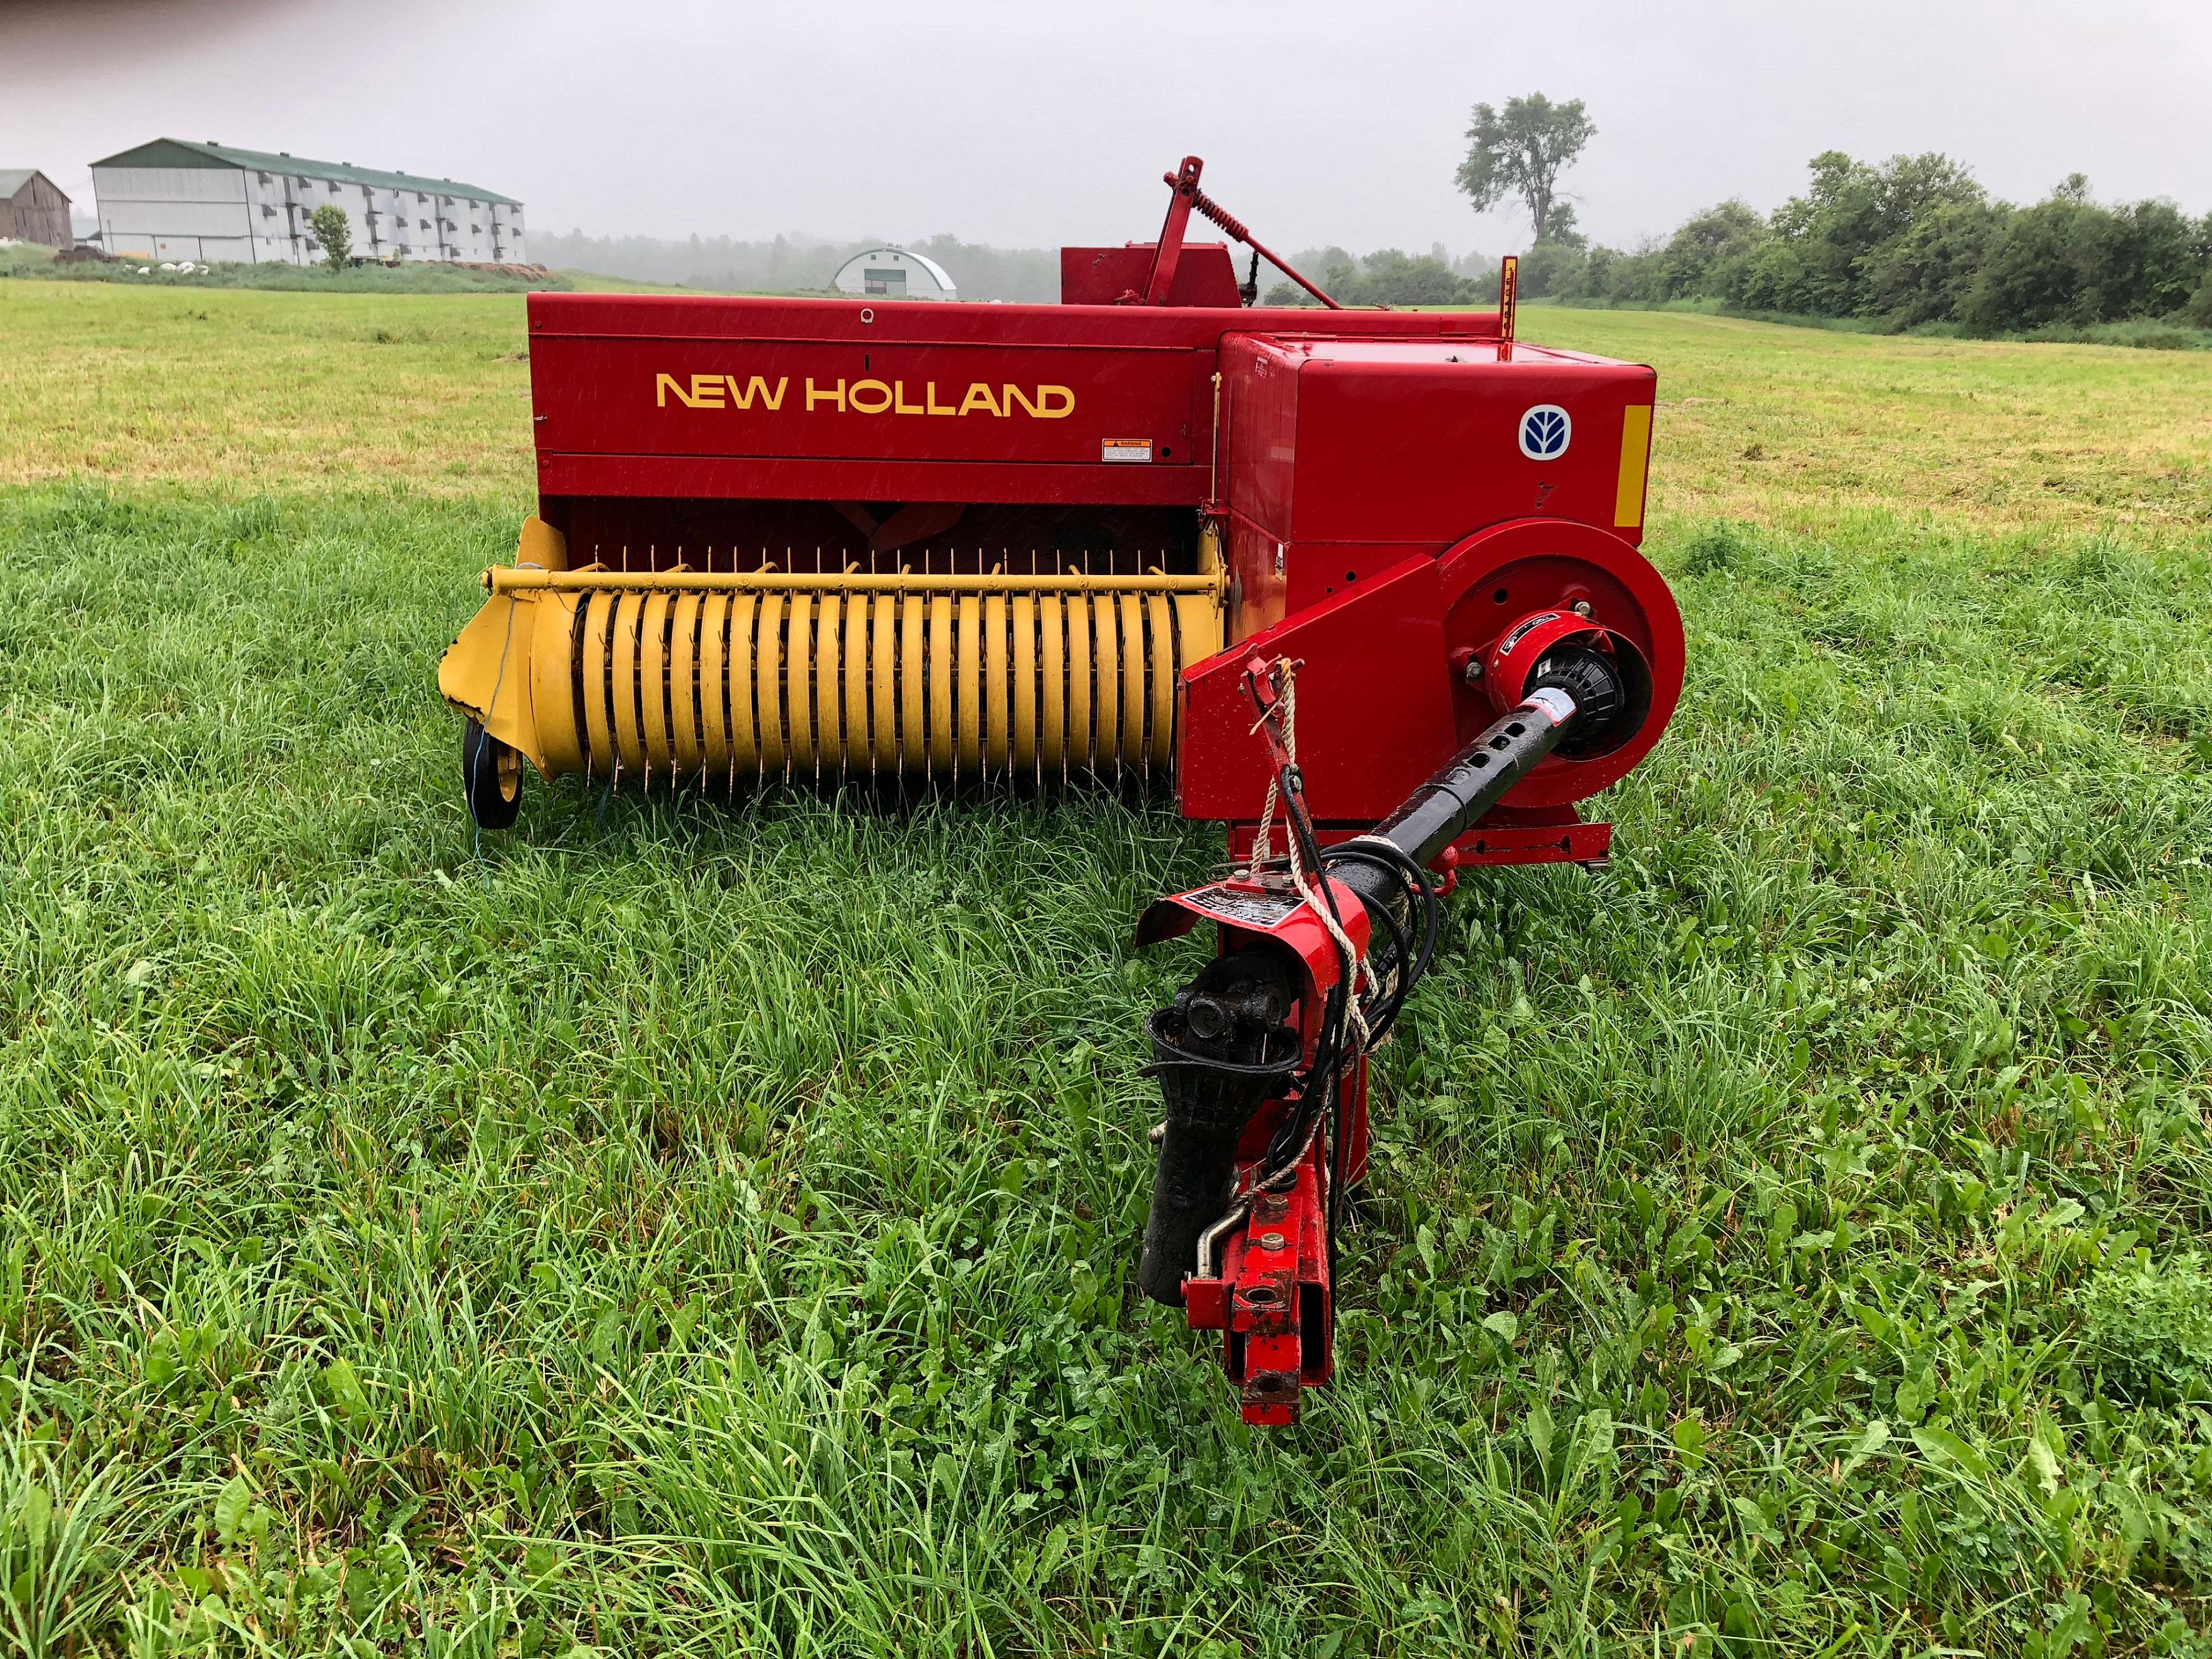 New Holland 570 Square Baler w/ Thrower